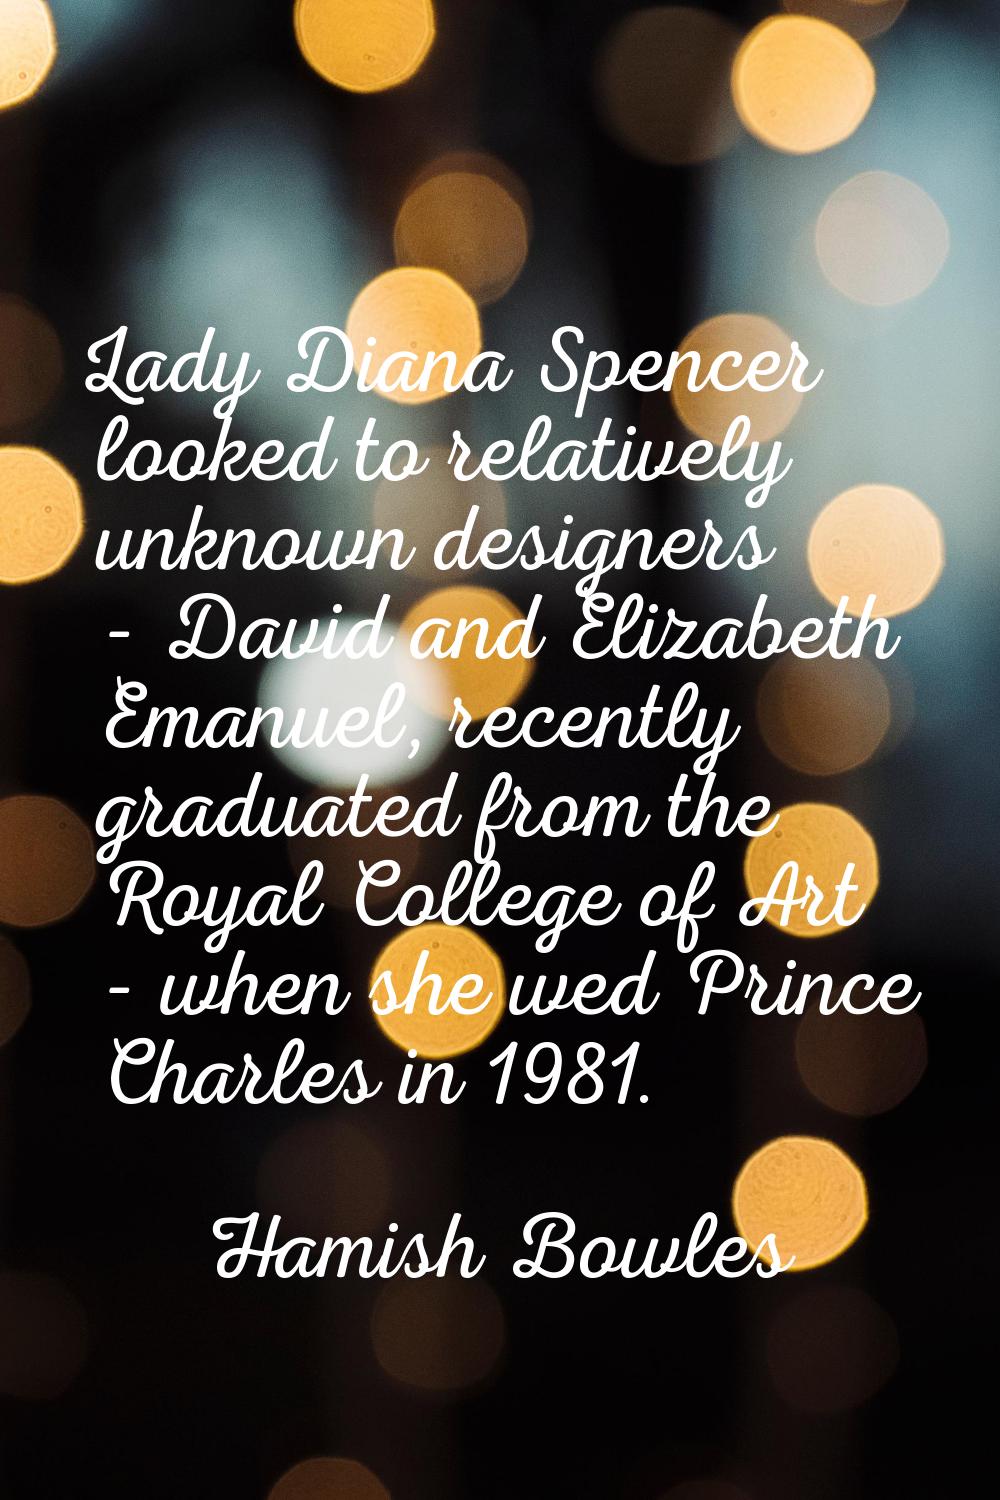 Lady Diana Spencer looked to relatively unknown designers - David and Elizabeth Emanuel, recently g